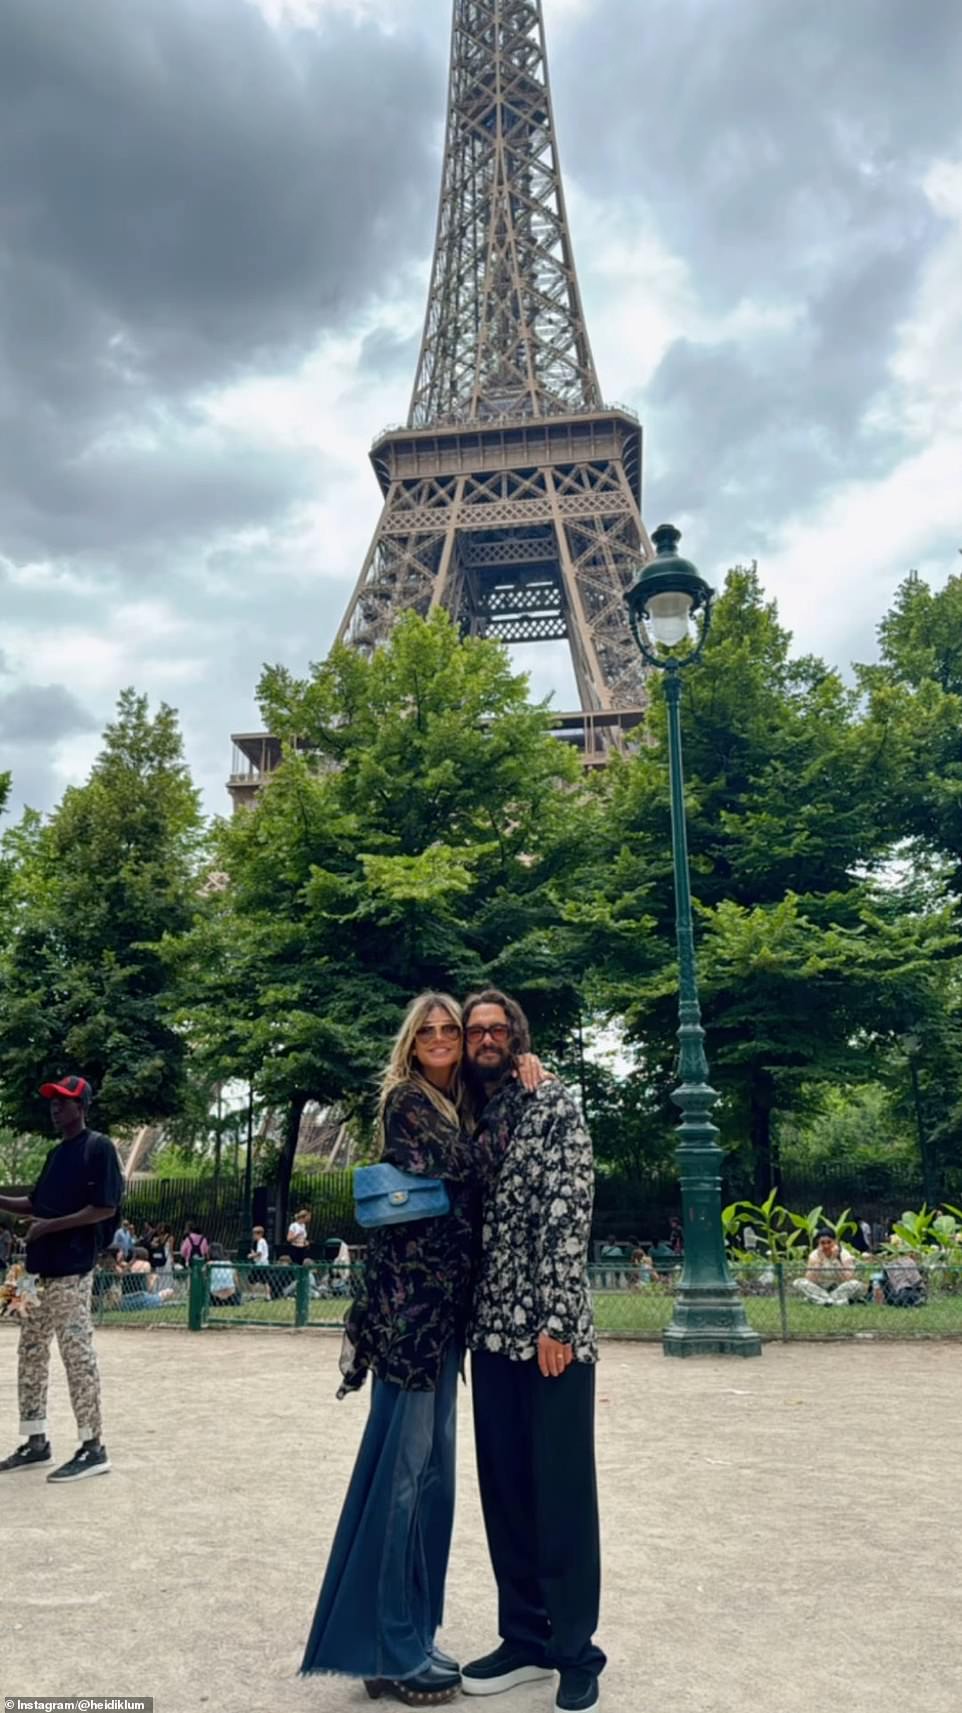 Heidi Klum is in Paris with her 34-year-old husband Tom Kaulitz of the band Tokio Hotel; they married in 2019